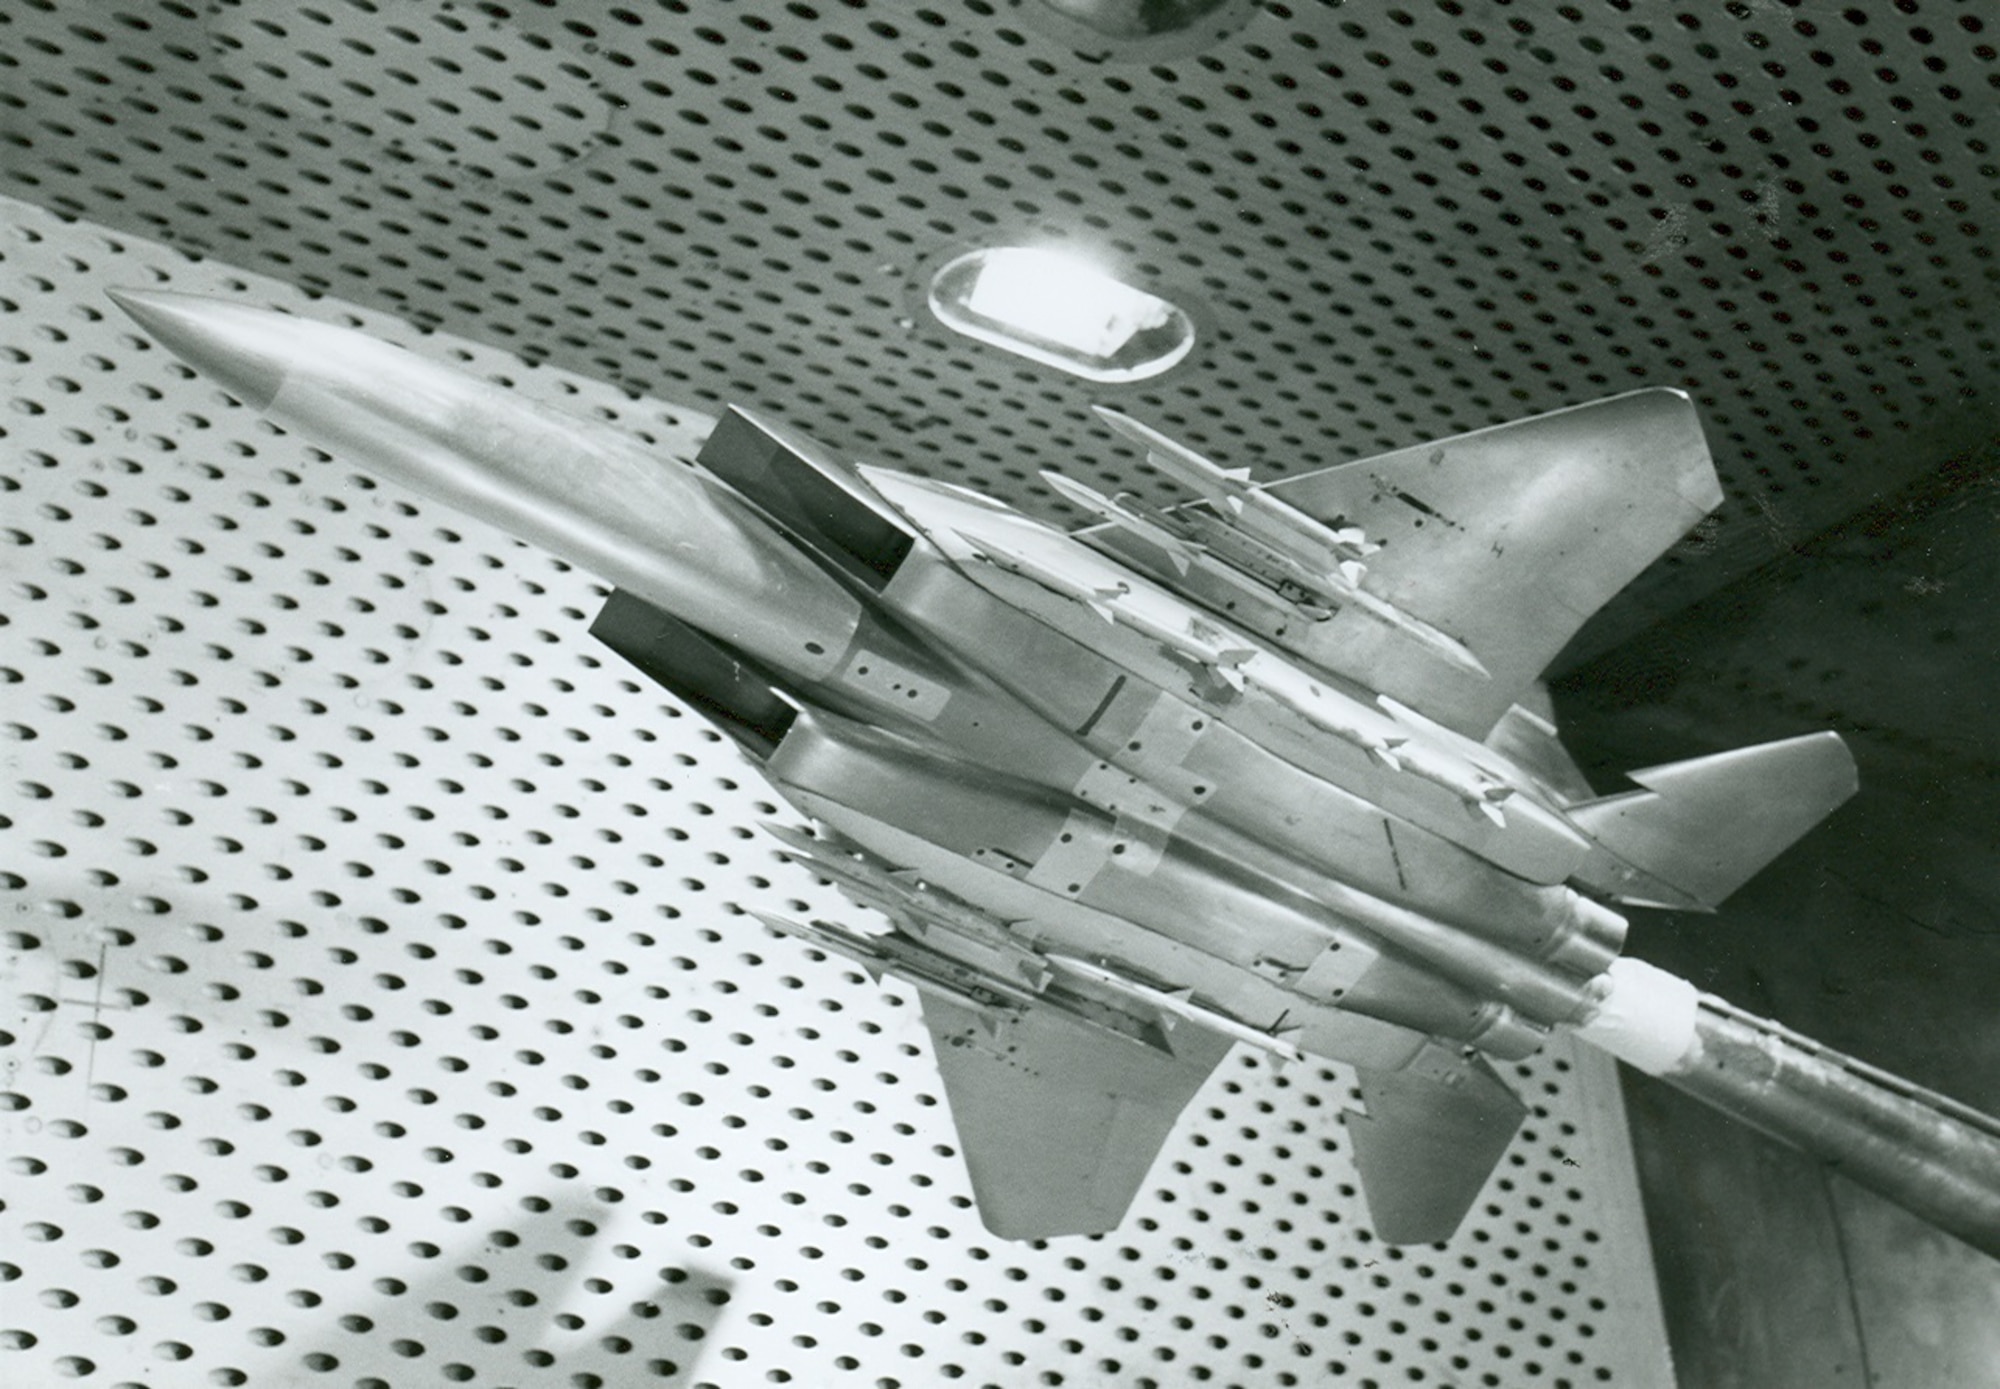 A scale model of the F-15 Eagle undergoes testing in the early 1980s in the 4-foot transonic wind tunnel at Arnold Air Force Base, Tennessee, headquarters of Arnold Engineering Development Complex. The Air Force recently celebrated the 50th anniversary of the F-15’s deployment. Models of the aircraft, engines and other F-15 components have frequently been tested by AEDC over the past 50 years. (U.S. Air Force photo)